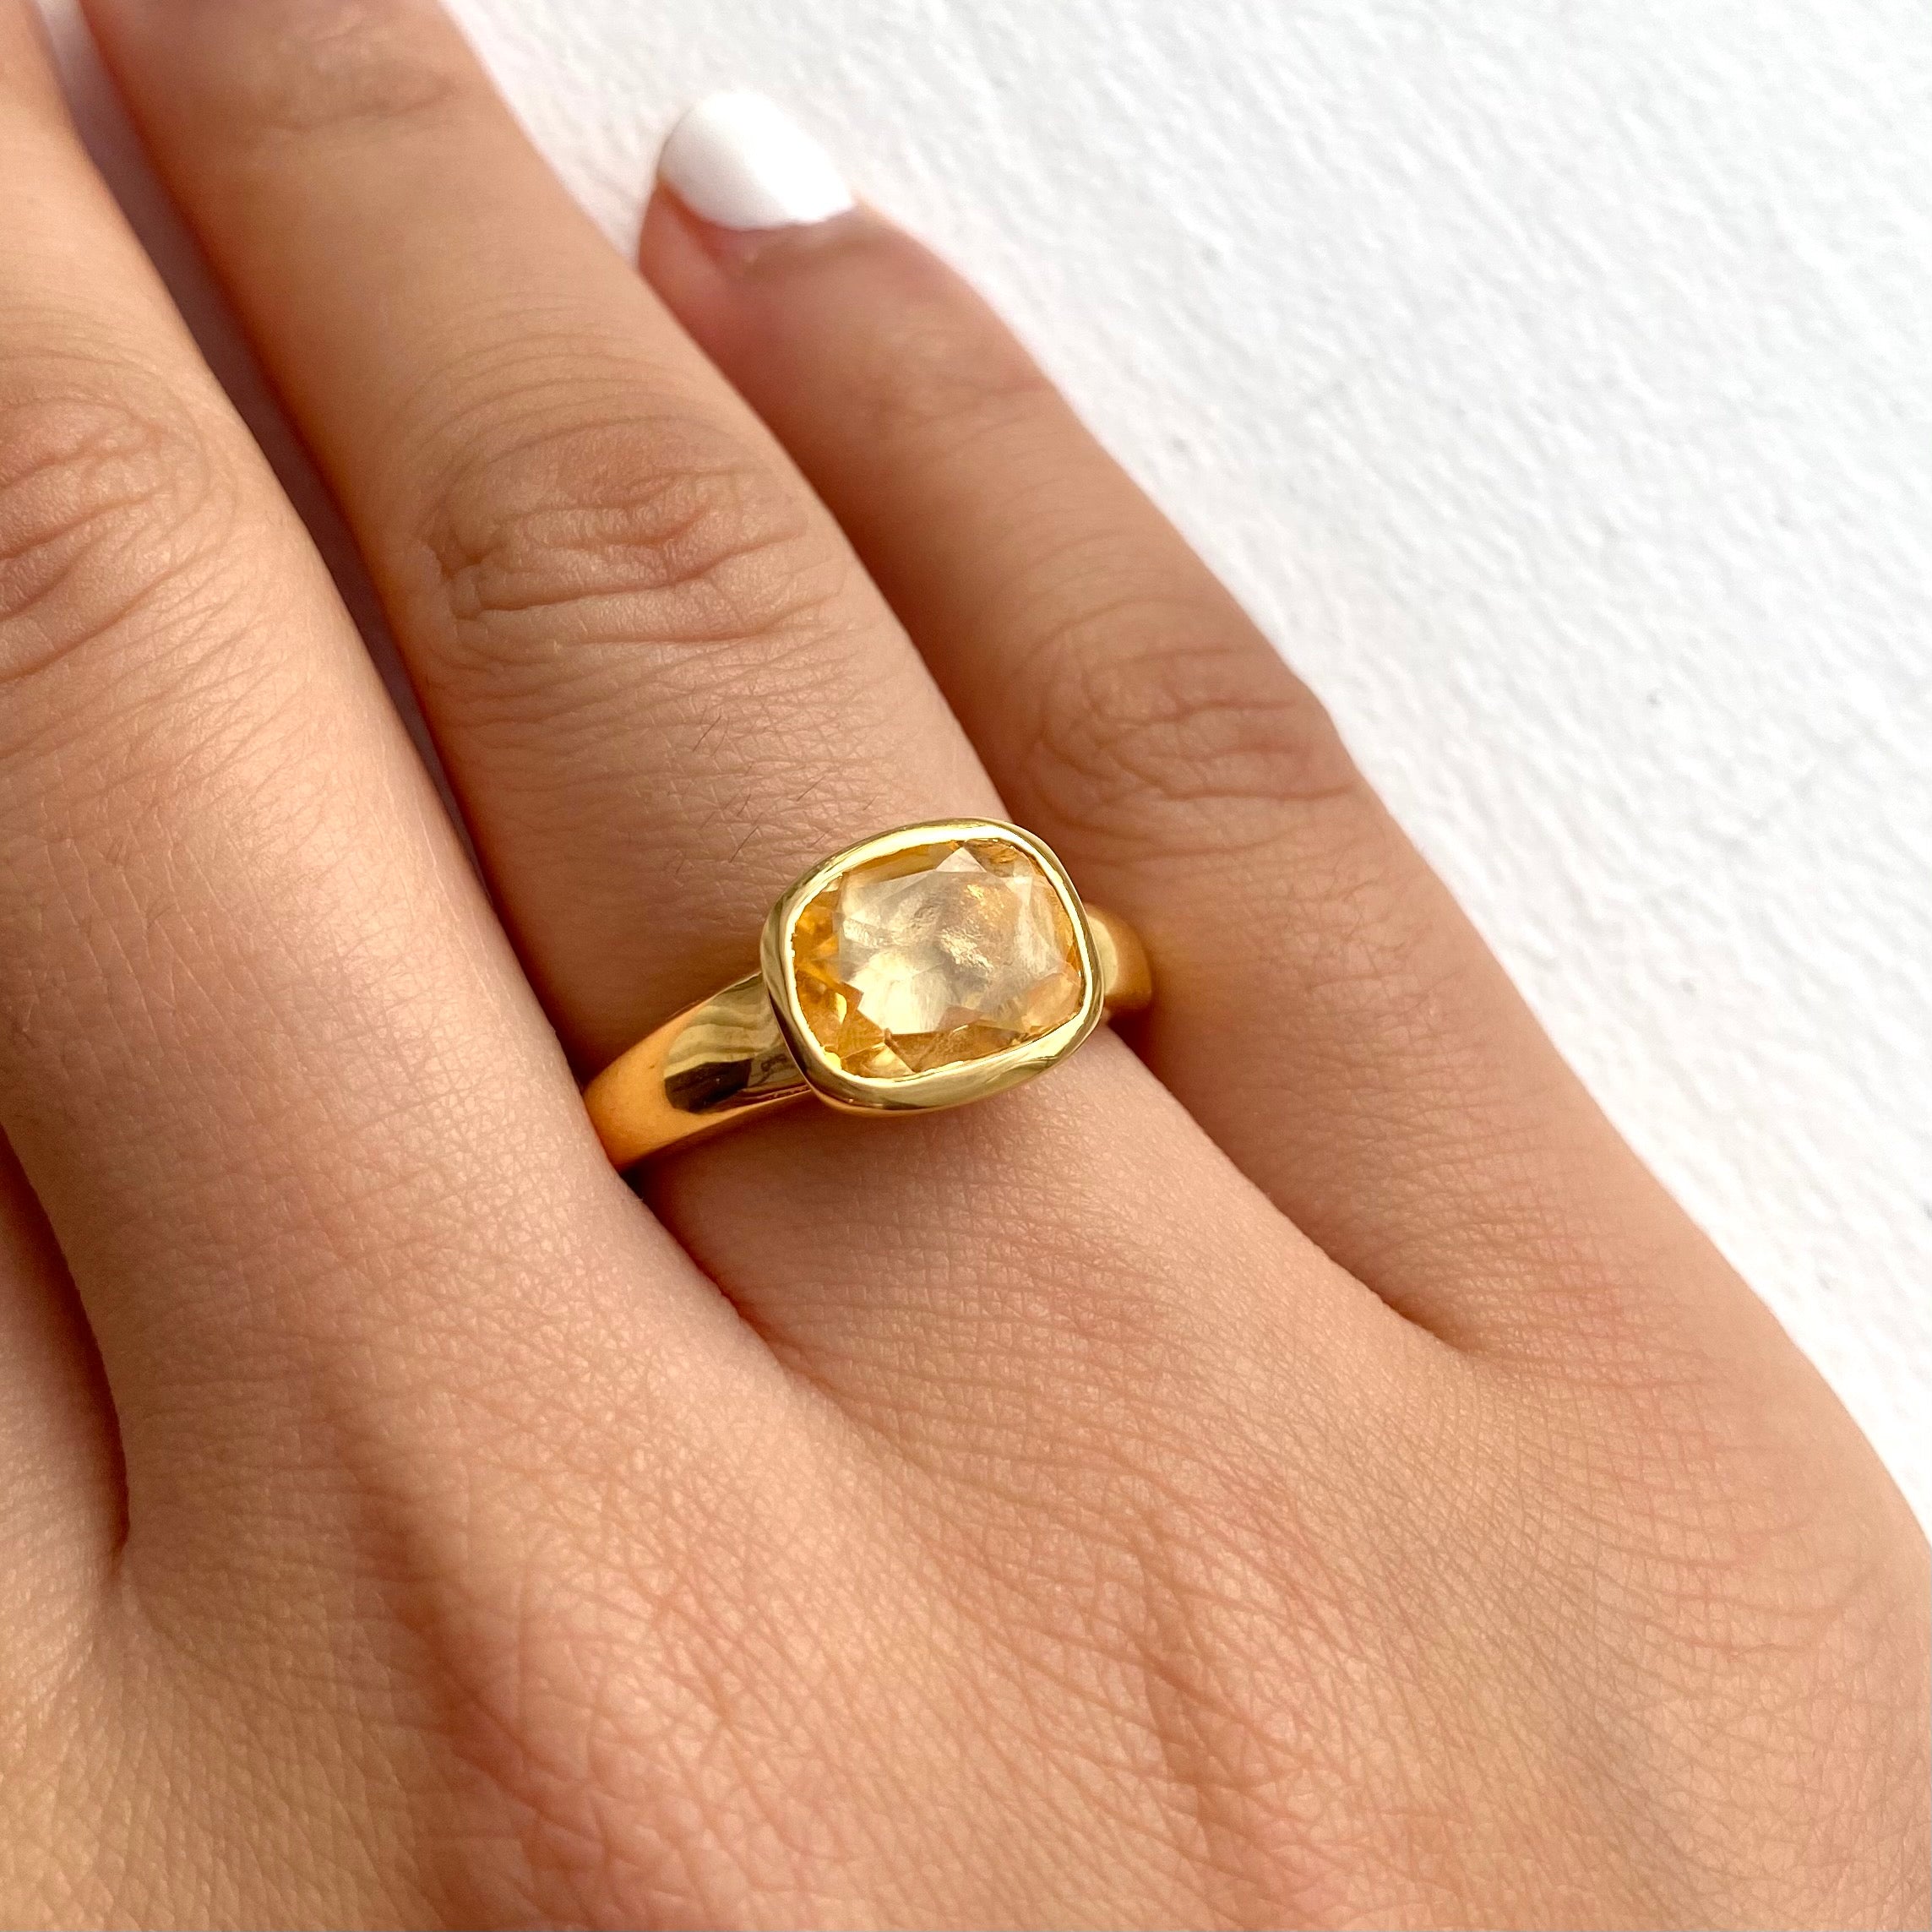 Faceted Rectangular Cut Natural Gemstone Gold Plated Sterling Silver Ring - Citrine